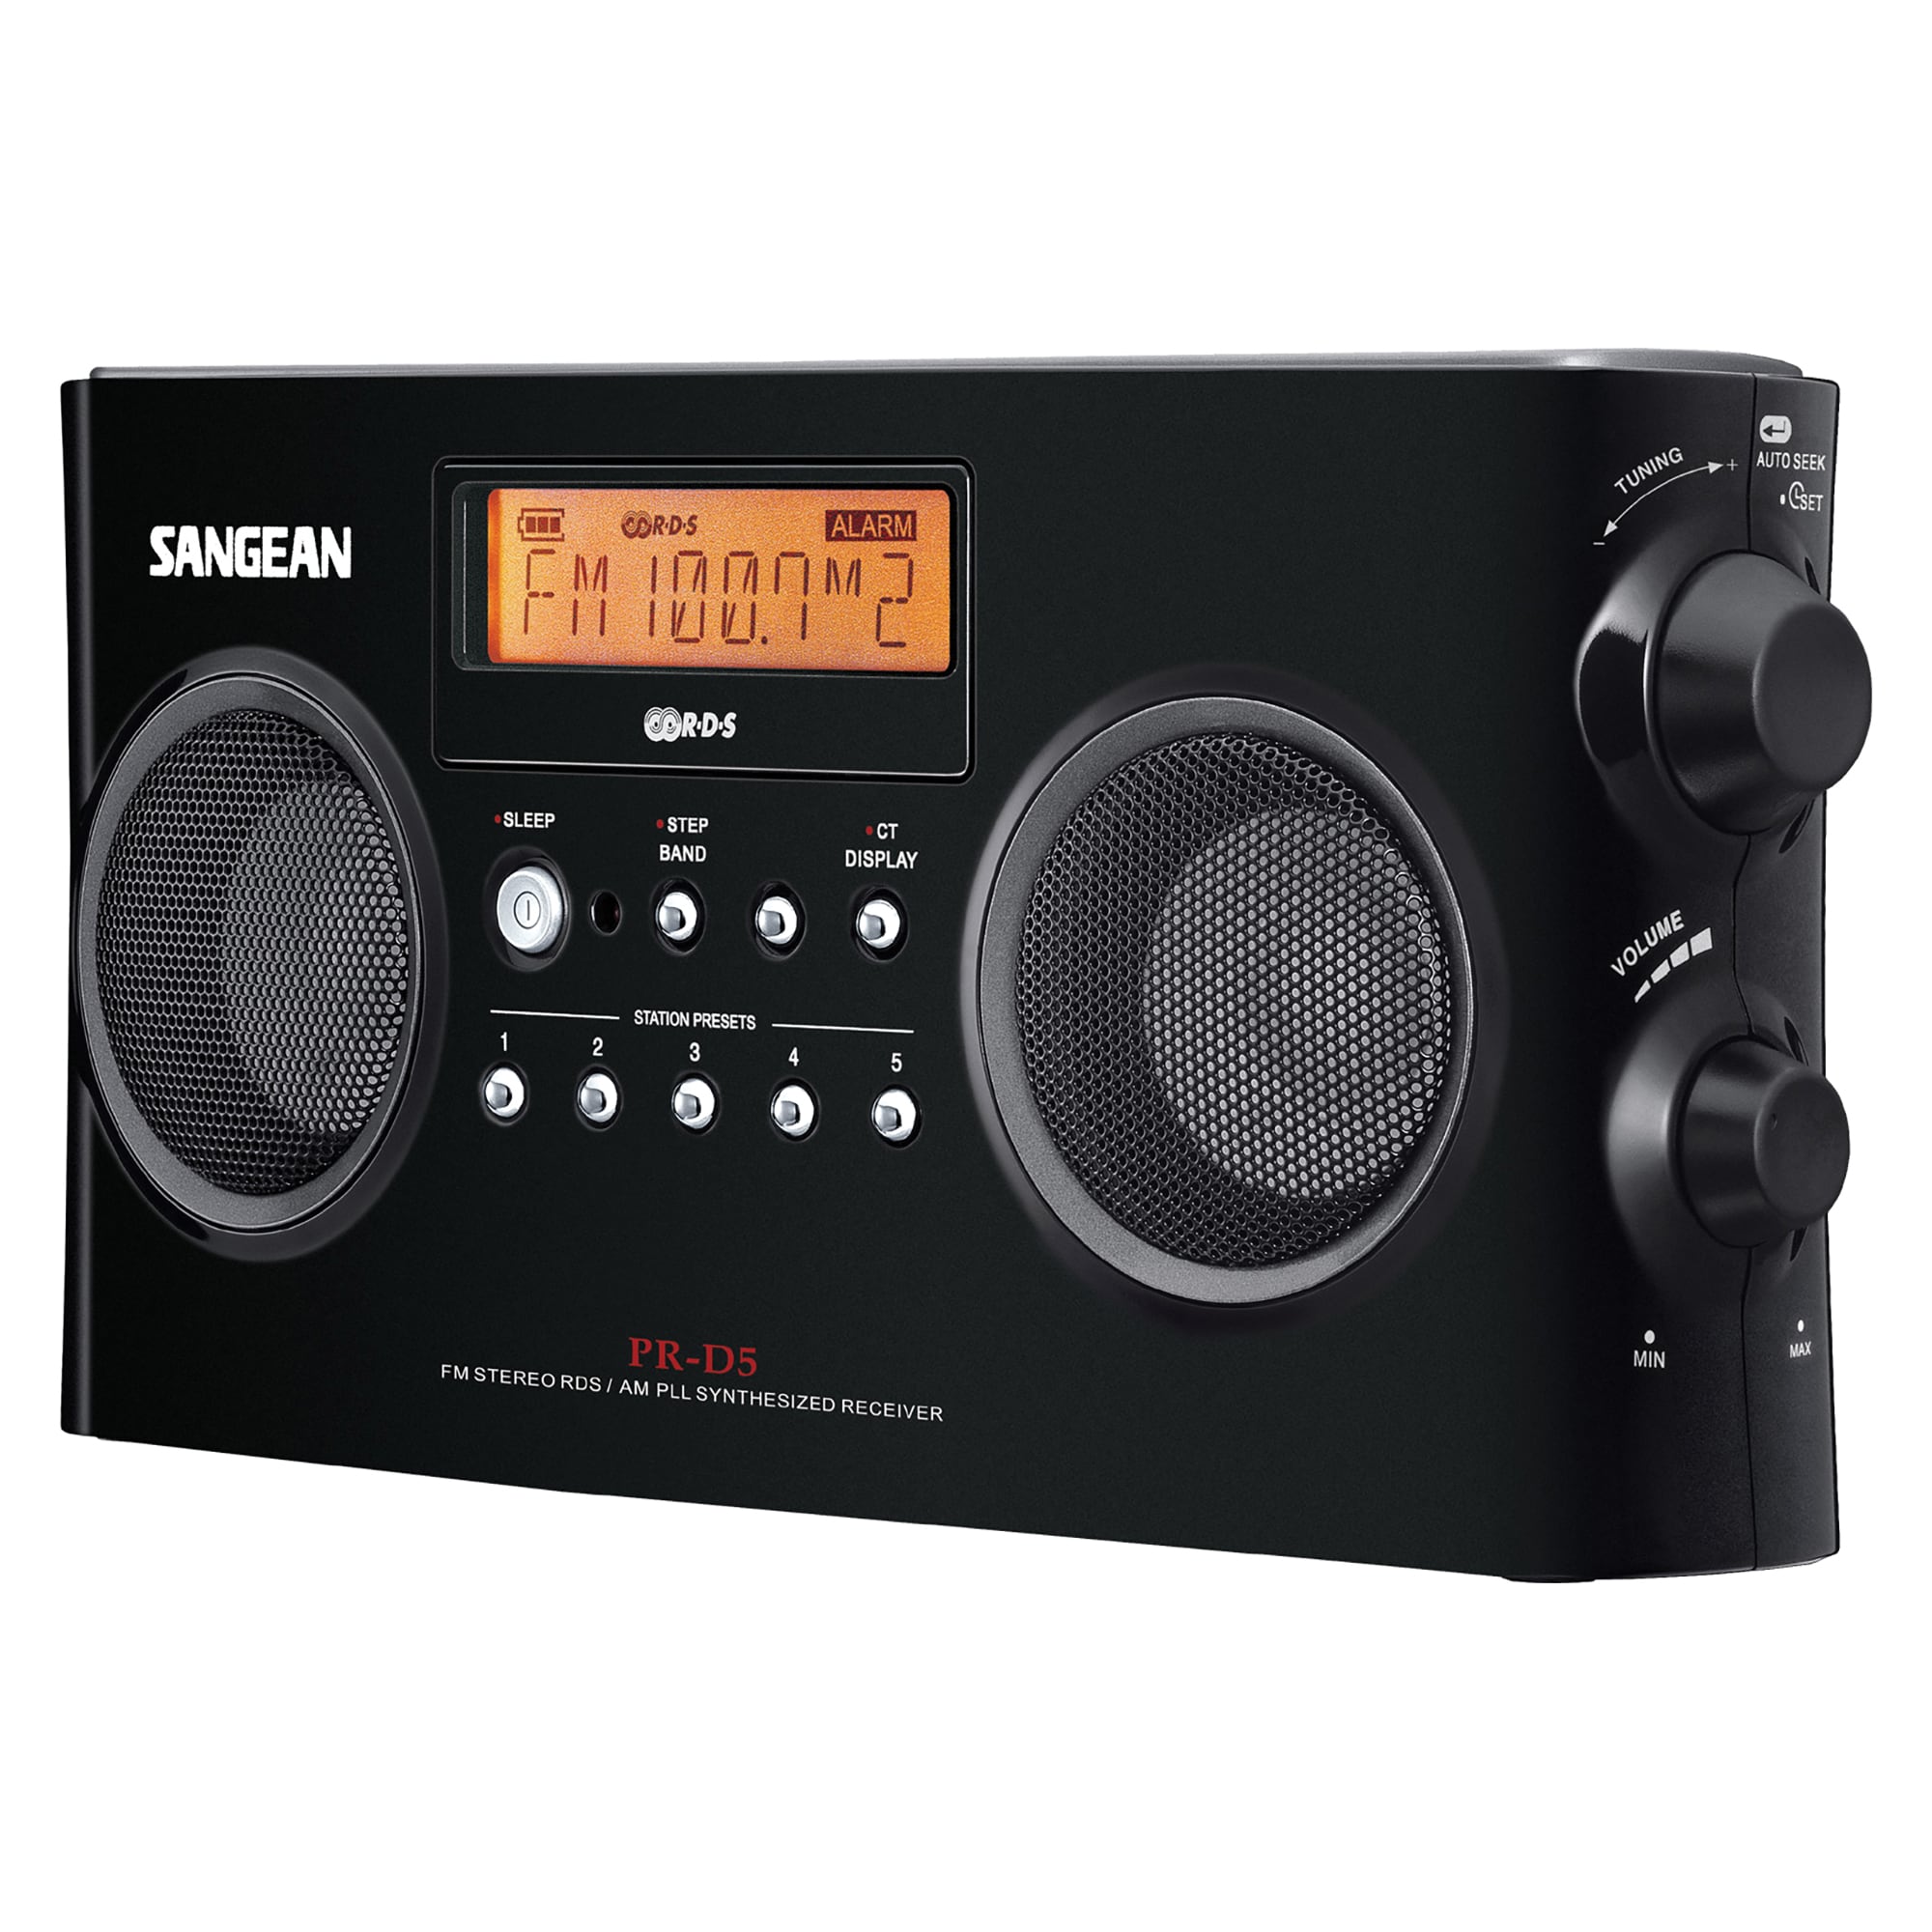 Panasonic AM/FM AC/DC Portable Radio - Metallic Chrome - Built-In Speakers  - Analog Display - Portable Boombox - Ideal for On-The-Go Listening